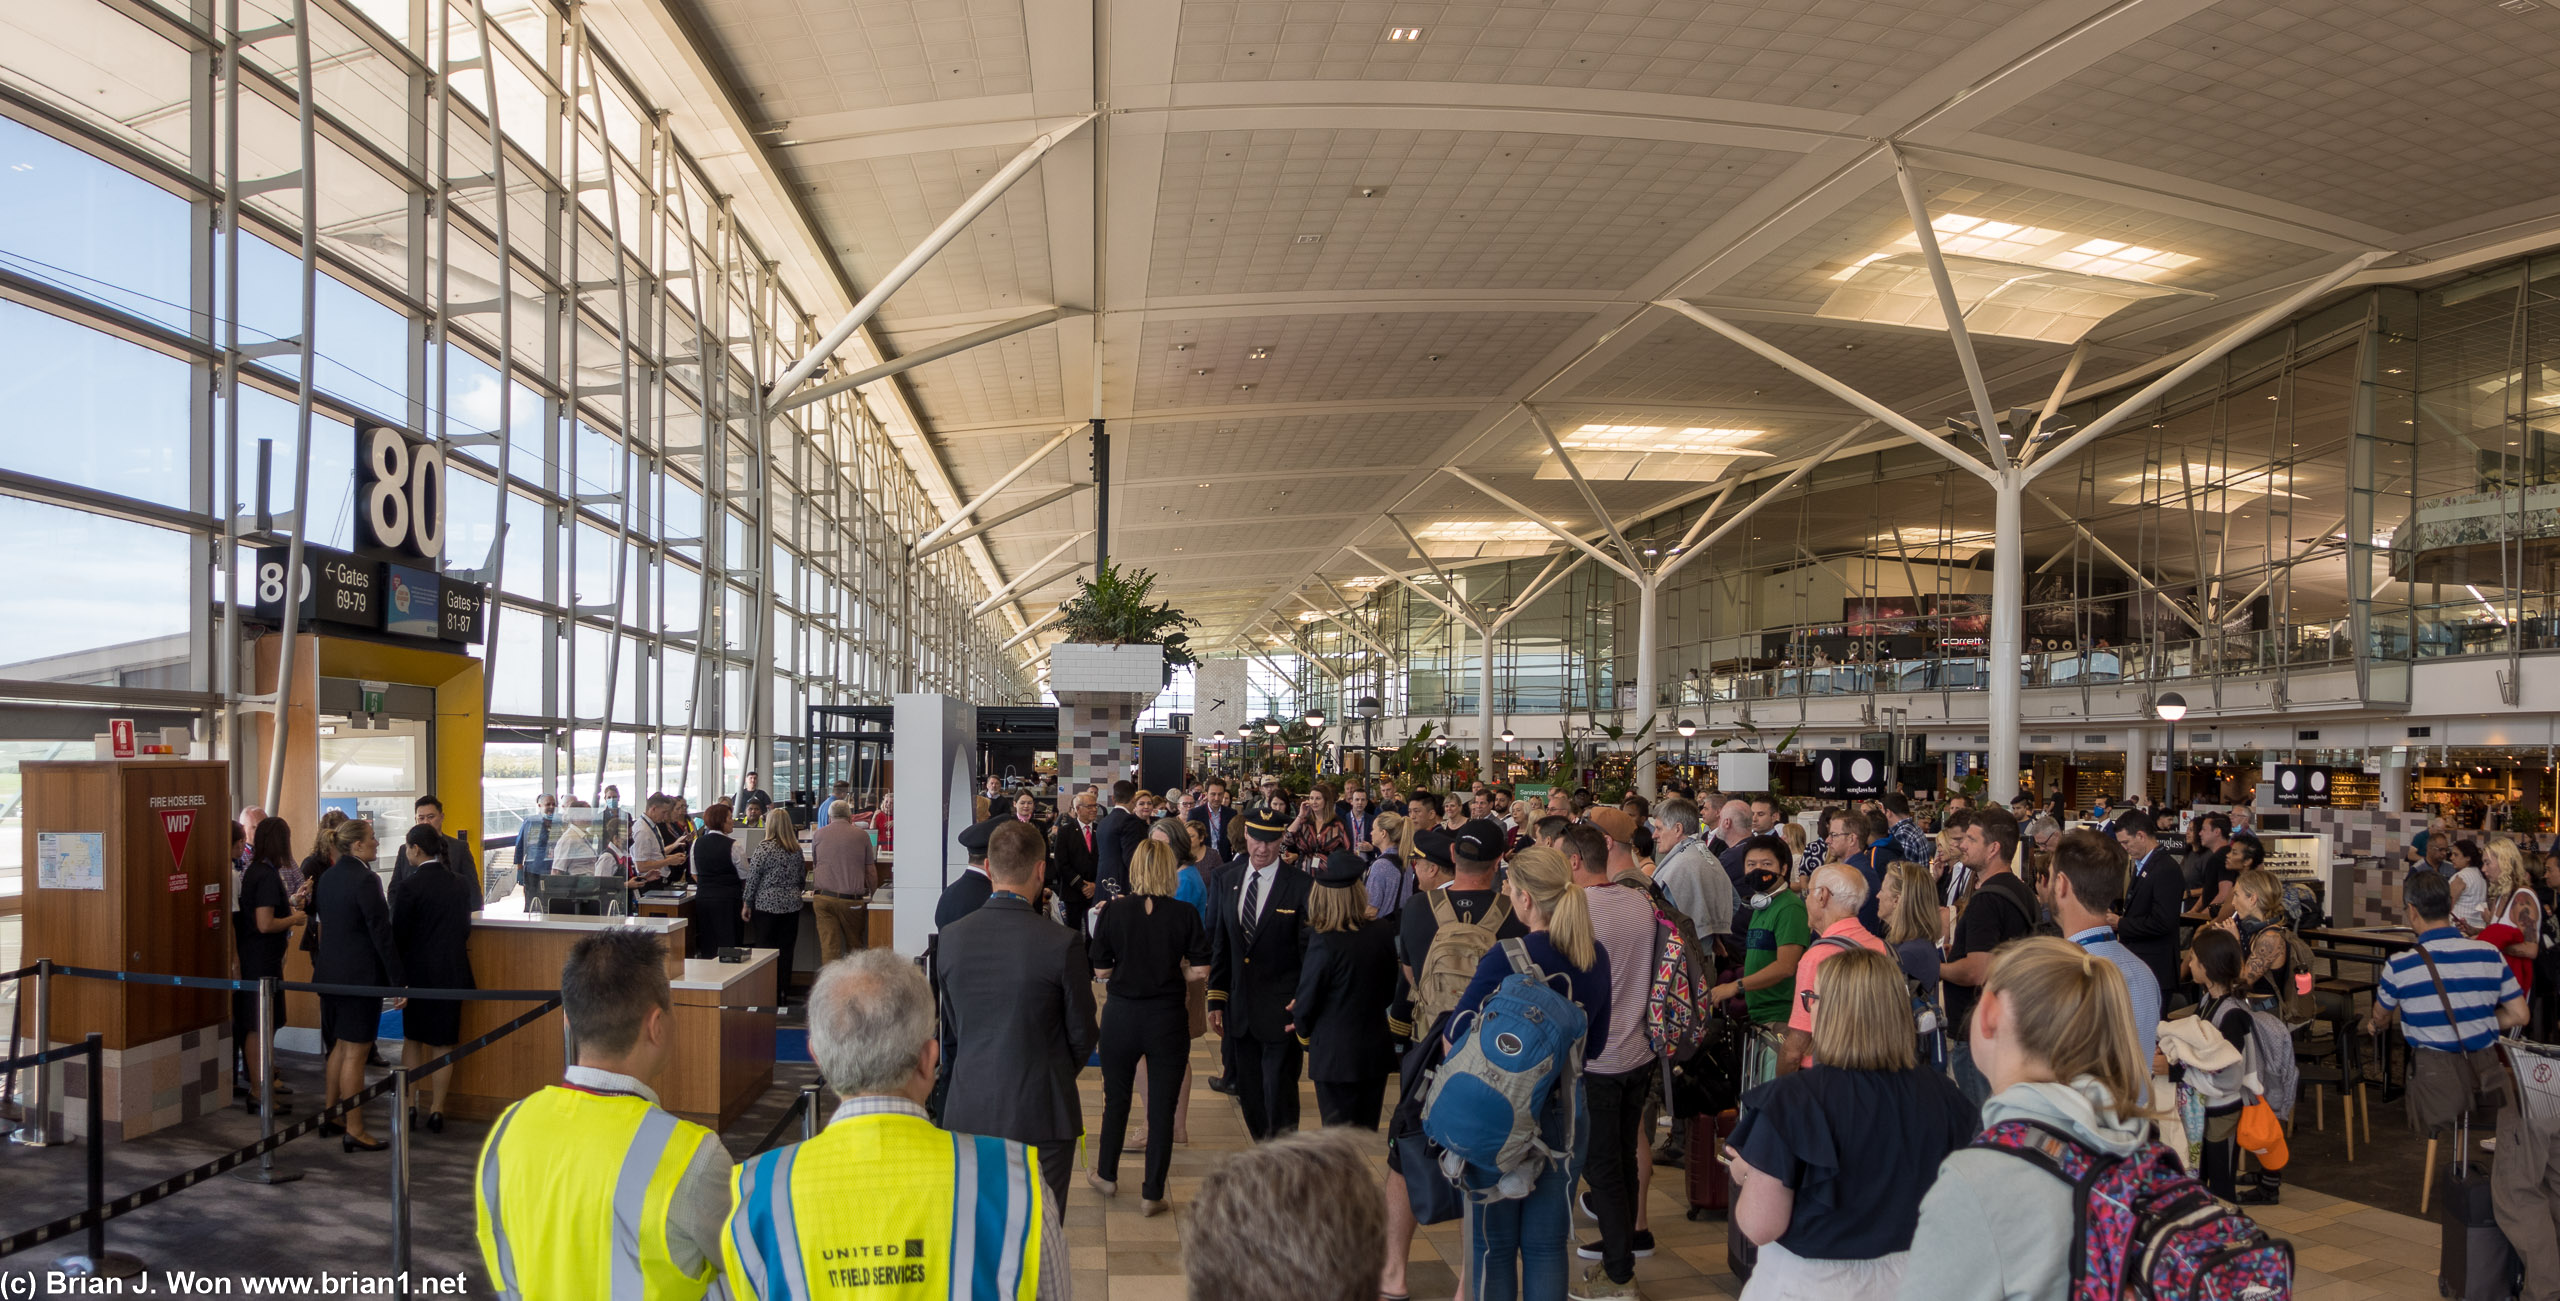 Brisbane Airport's international terminal is crowded with passengers ready for the inaugural flight from BNE-SFO.